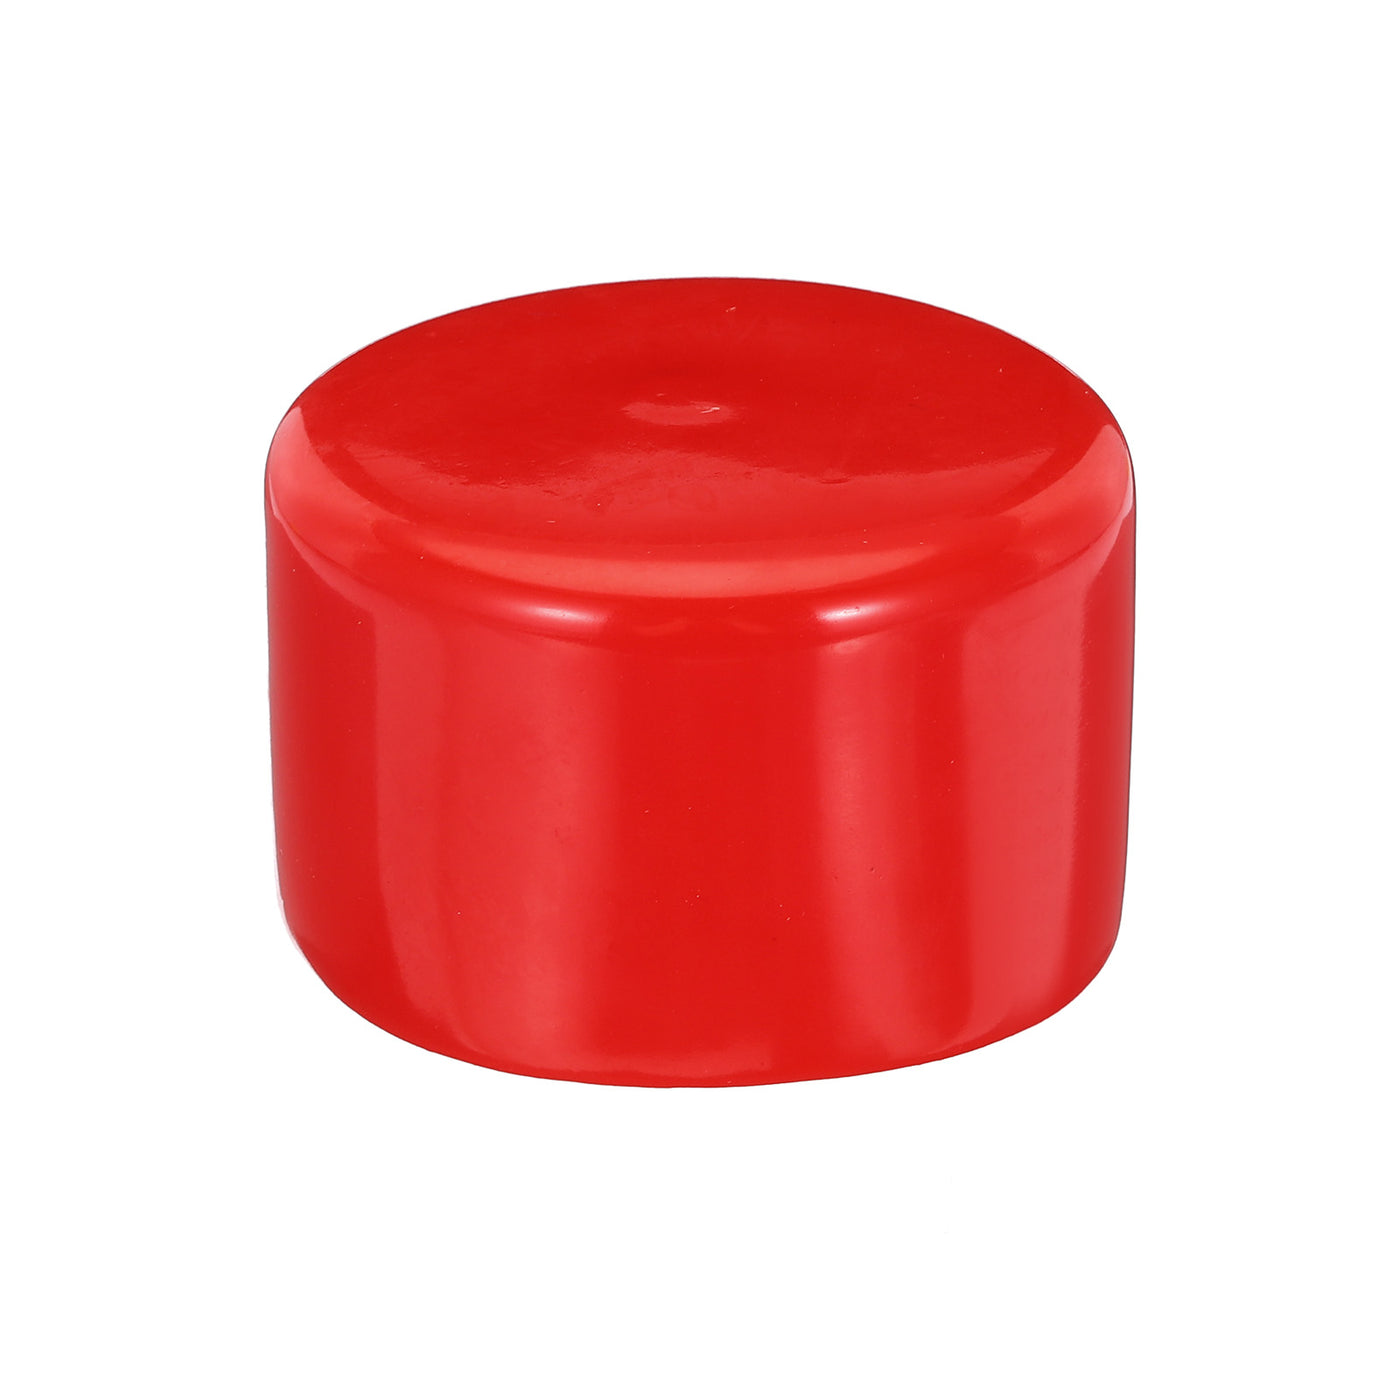 uxcell Uxcell Rubber End Caps 85mm ID Vinyl Round Tube Bolt Cap Cover Screw Thread Protectors Red